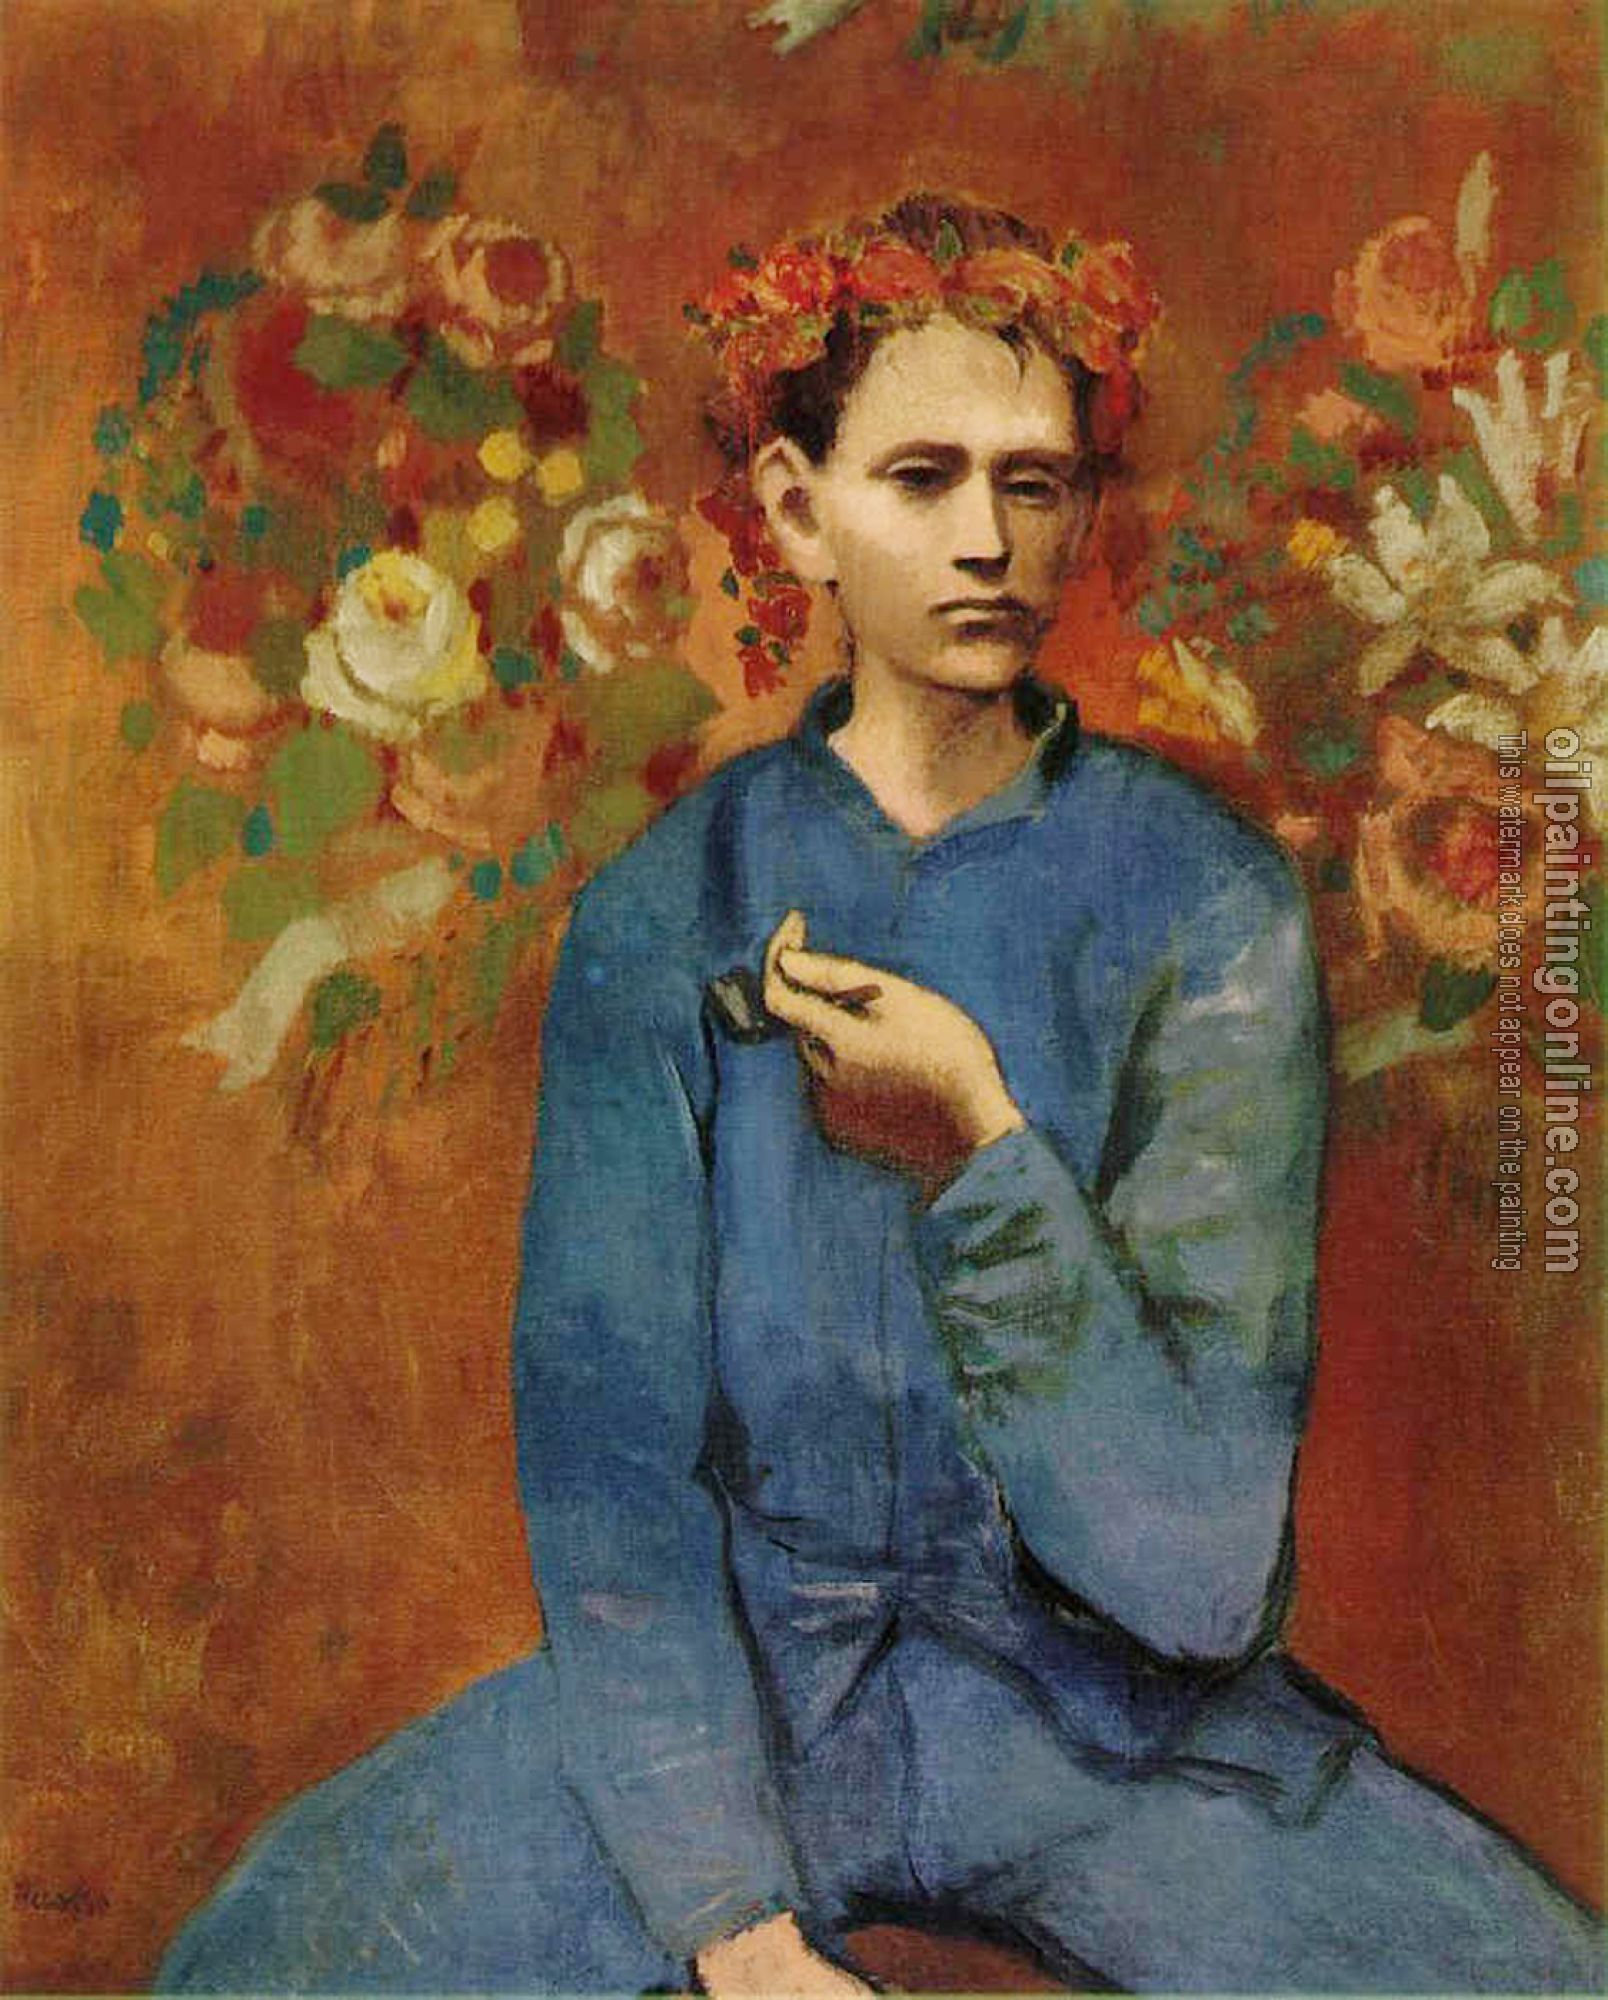 Picasso, Pablo - boy with a pipe